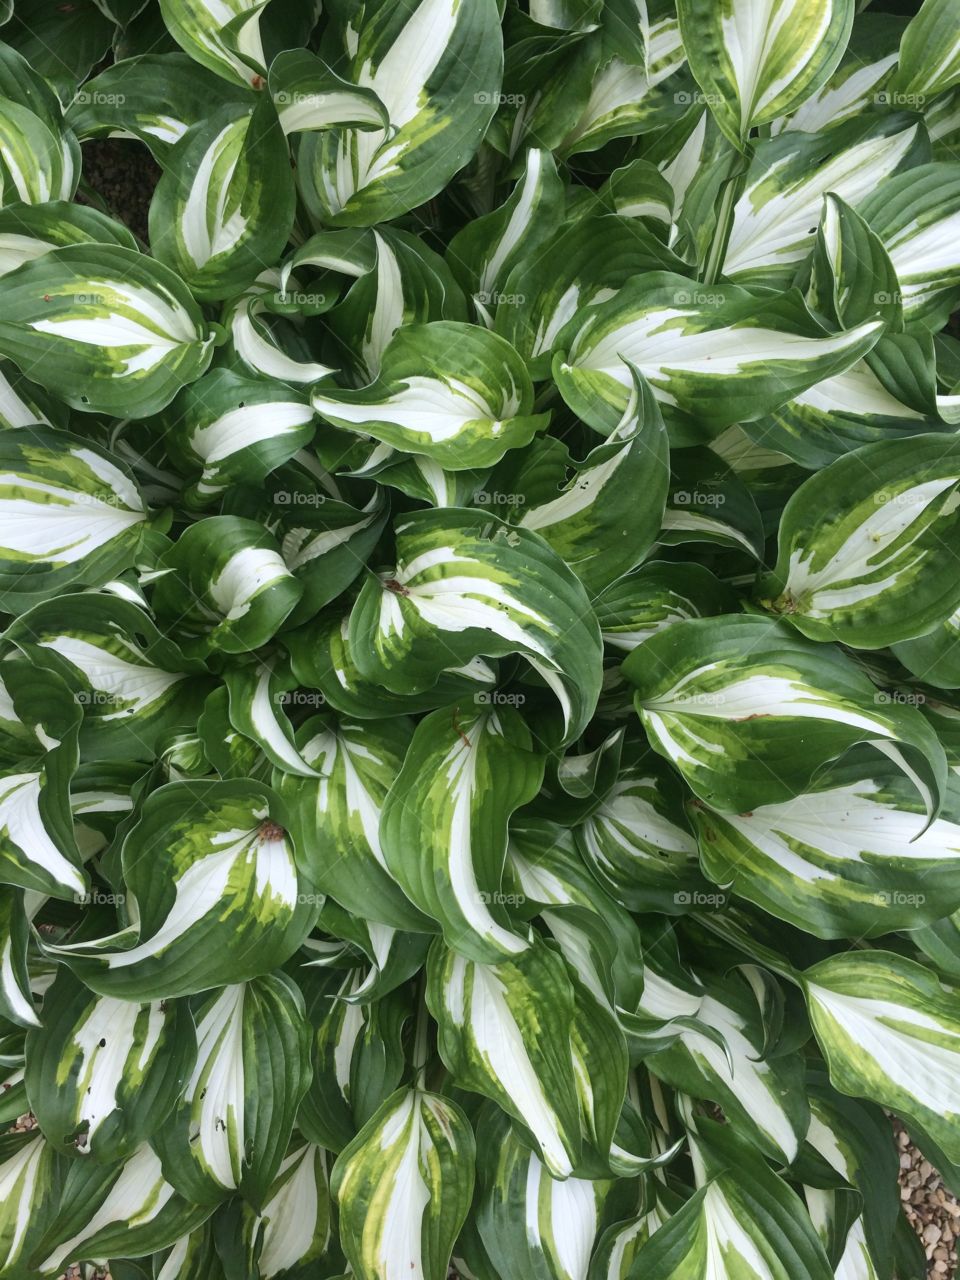 Green and white leaves on this fascinating plant.